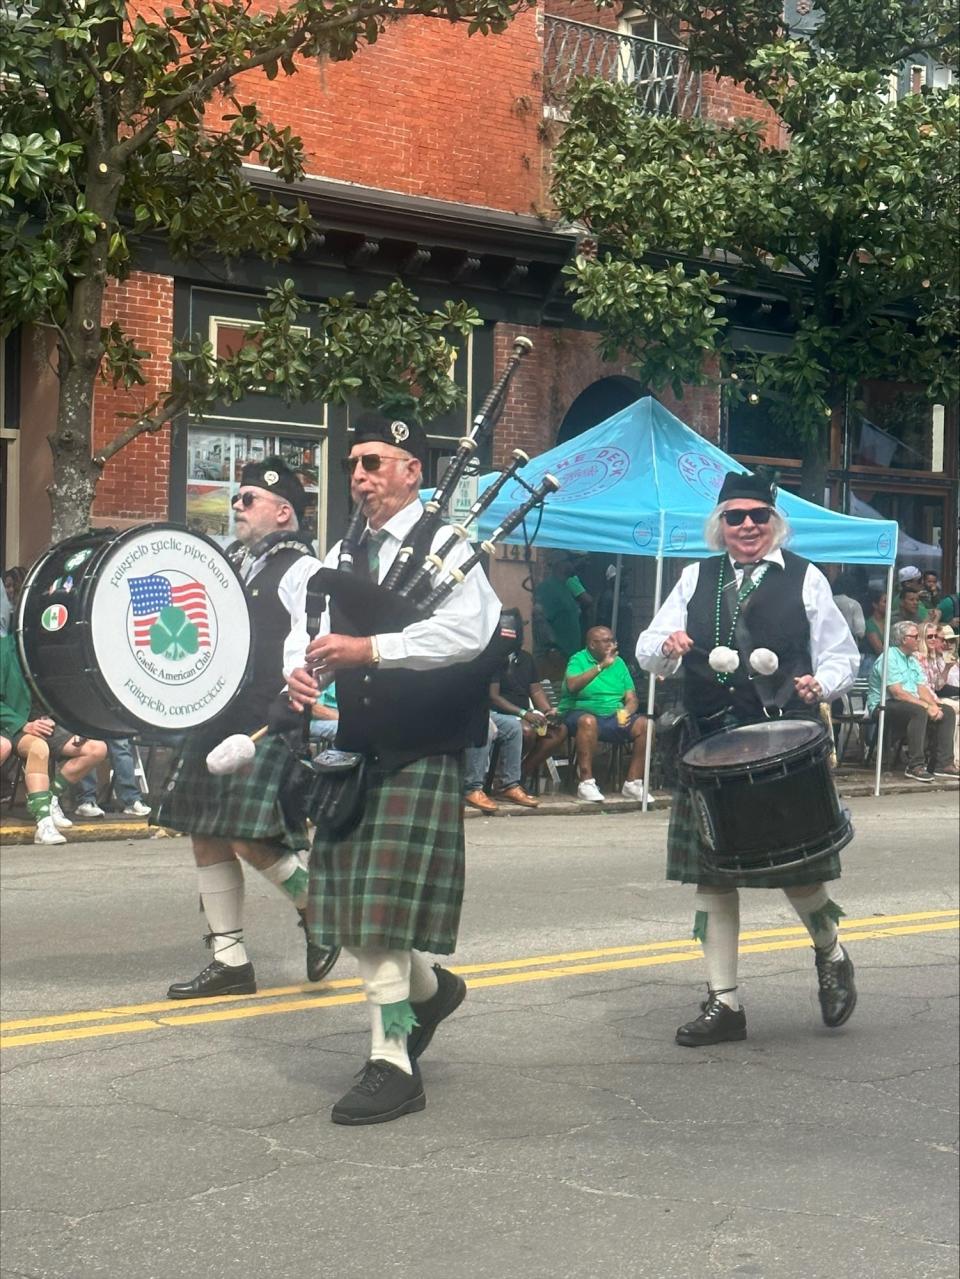 Tom Glynn (left) and Connie Beagan (right) flew in from Connecticut with the Fairfield Gaelic Pipe Band.